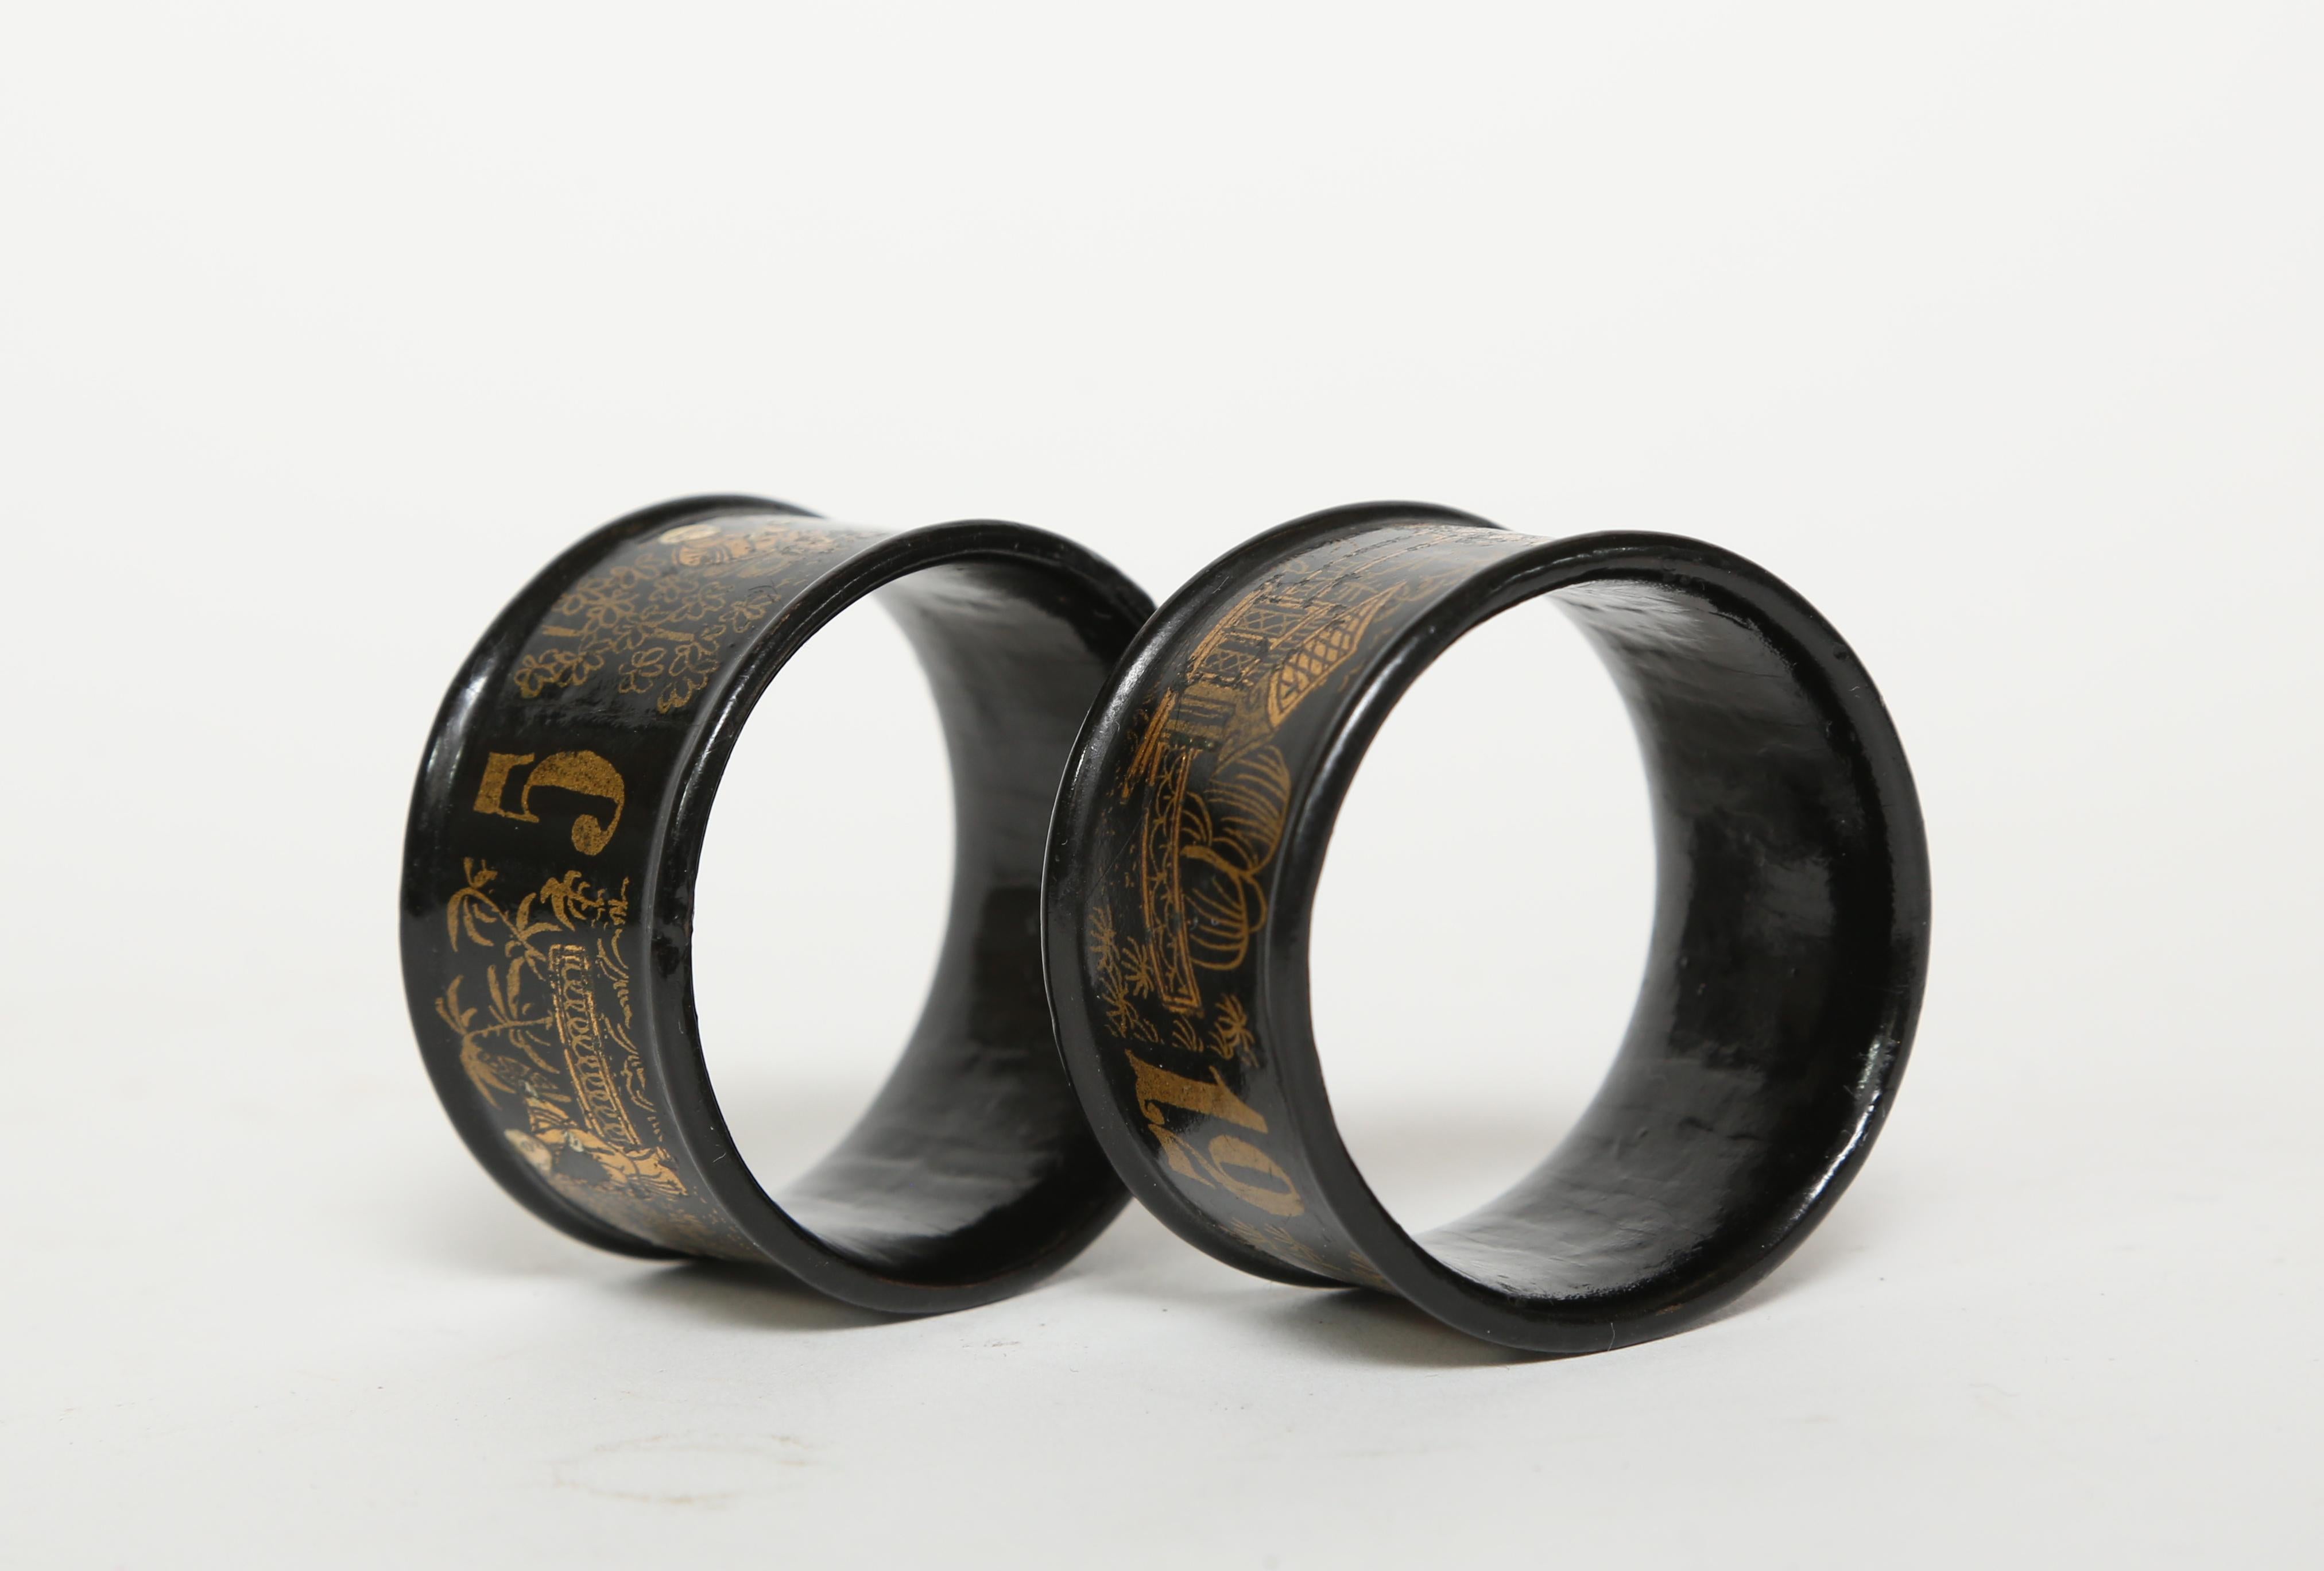 Hand-Painted  Antique  Black Lacquer on Papier Mâché Napkin Rings with a Chinoiserie Motif